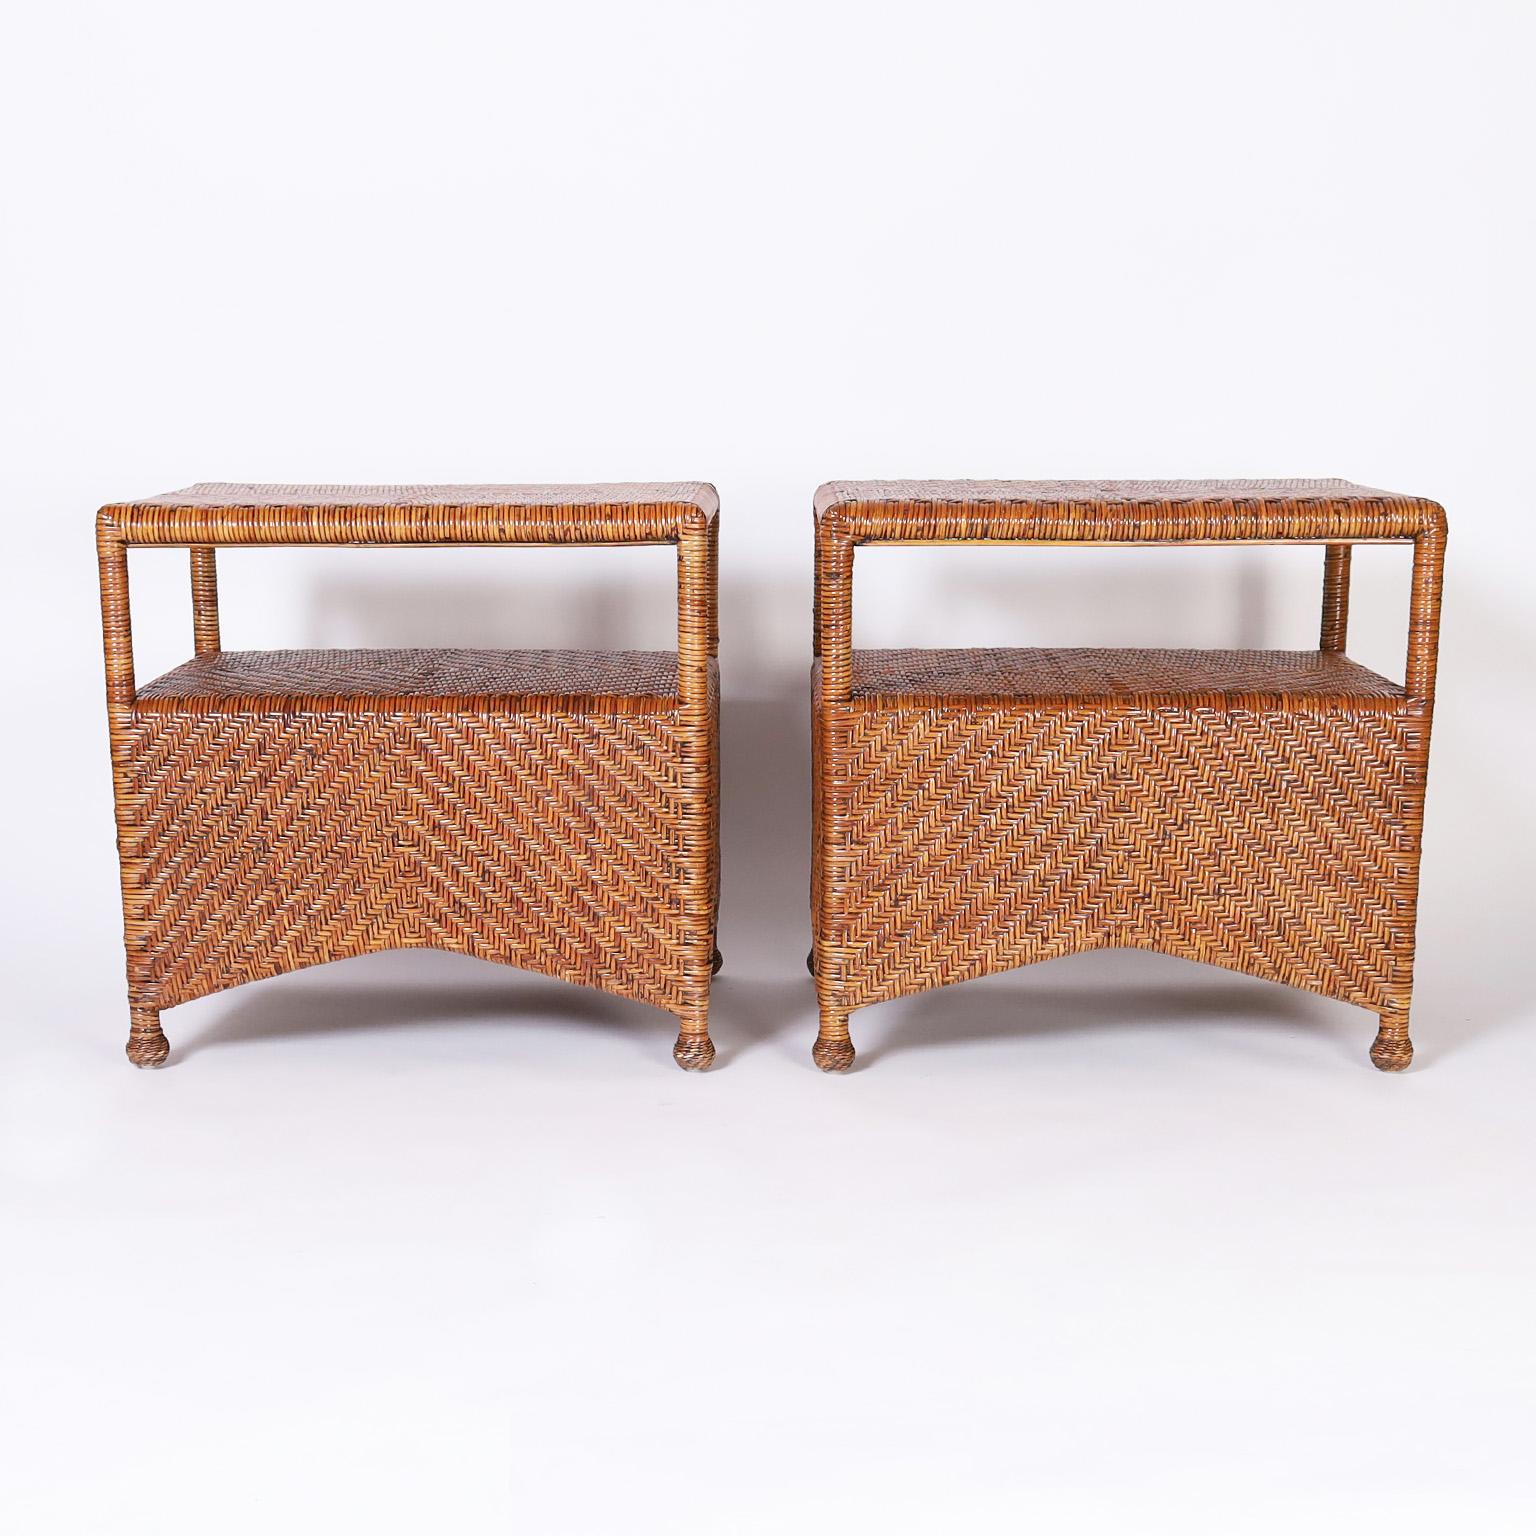 Mid century stands or tables with herringbone pattern reed wrapped around a wood frame having two tiers.